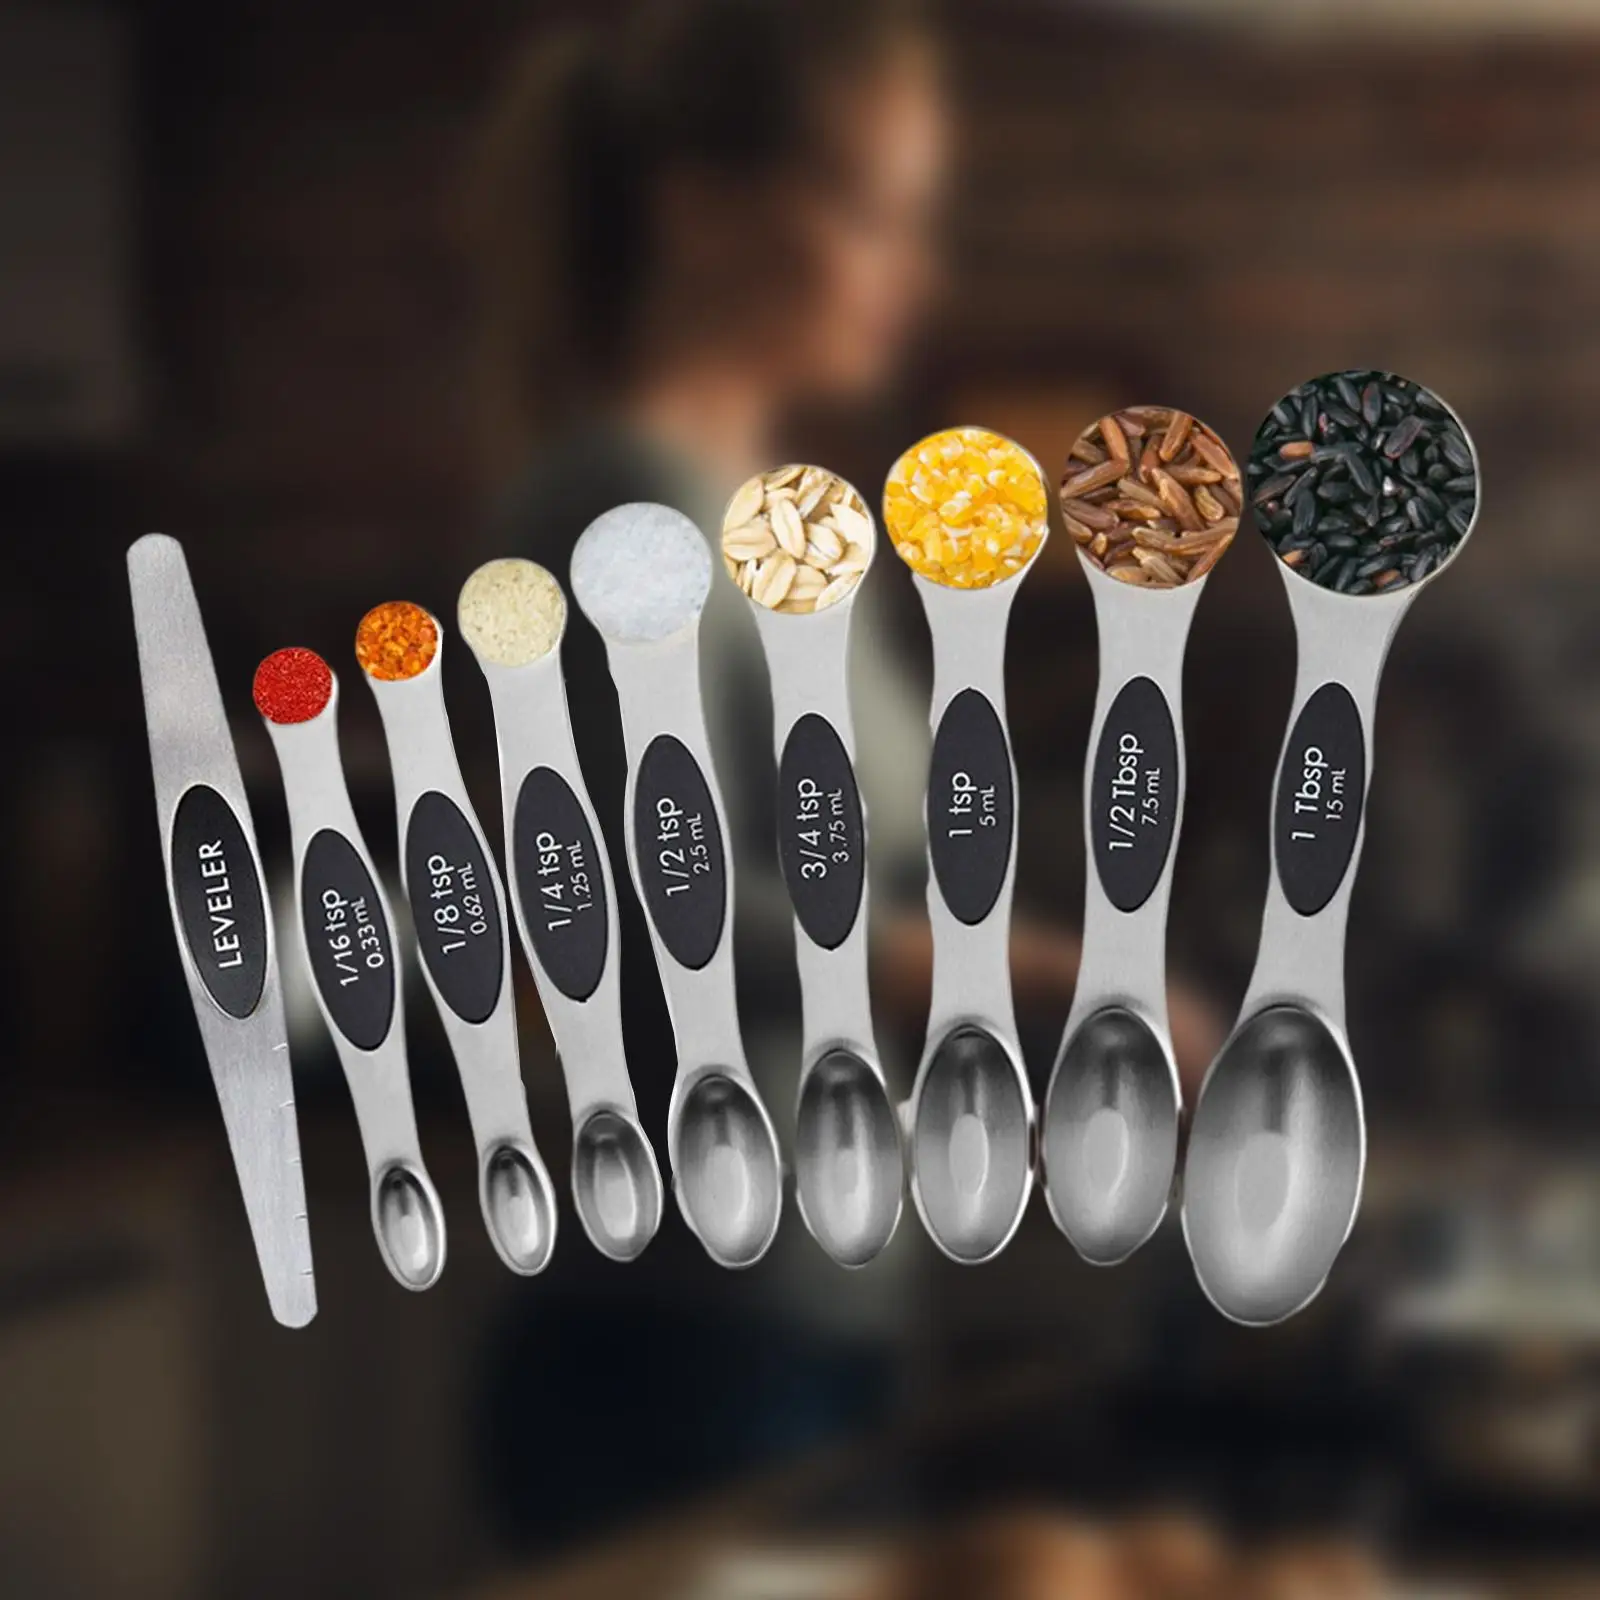 9 Pieces  Measuring Spoons Stainless Steel d Stackable Teaspoon for Measuring Dry and Liquid, Fit for Spice Jars